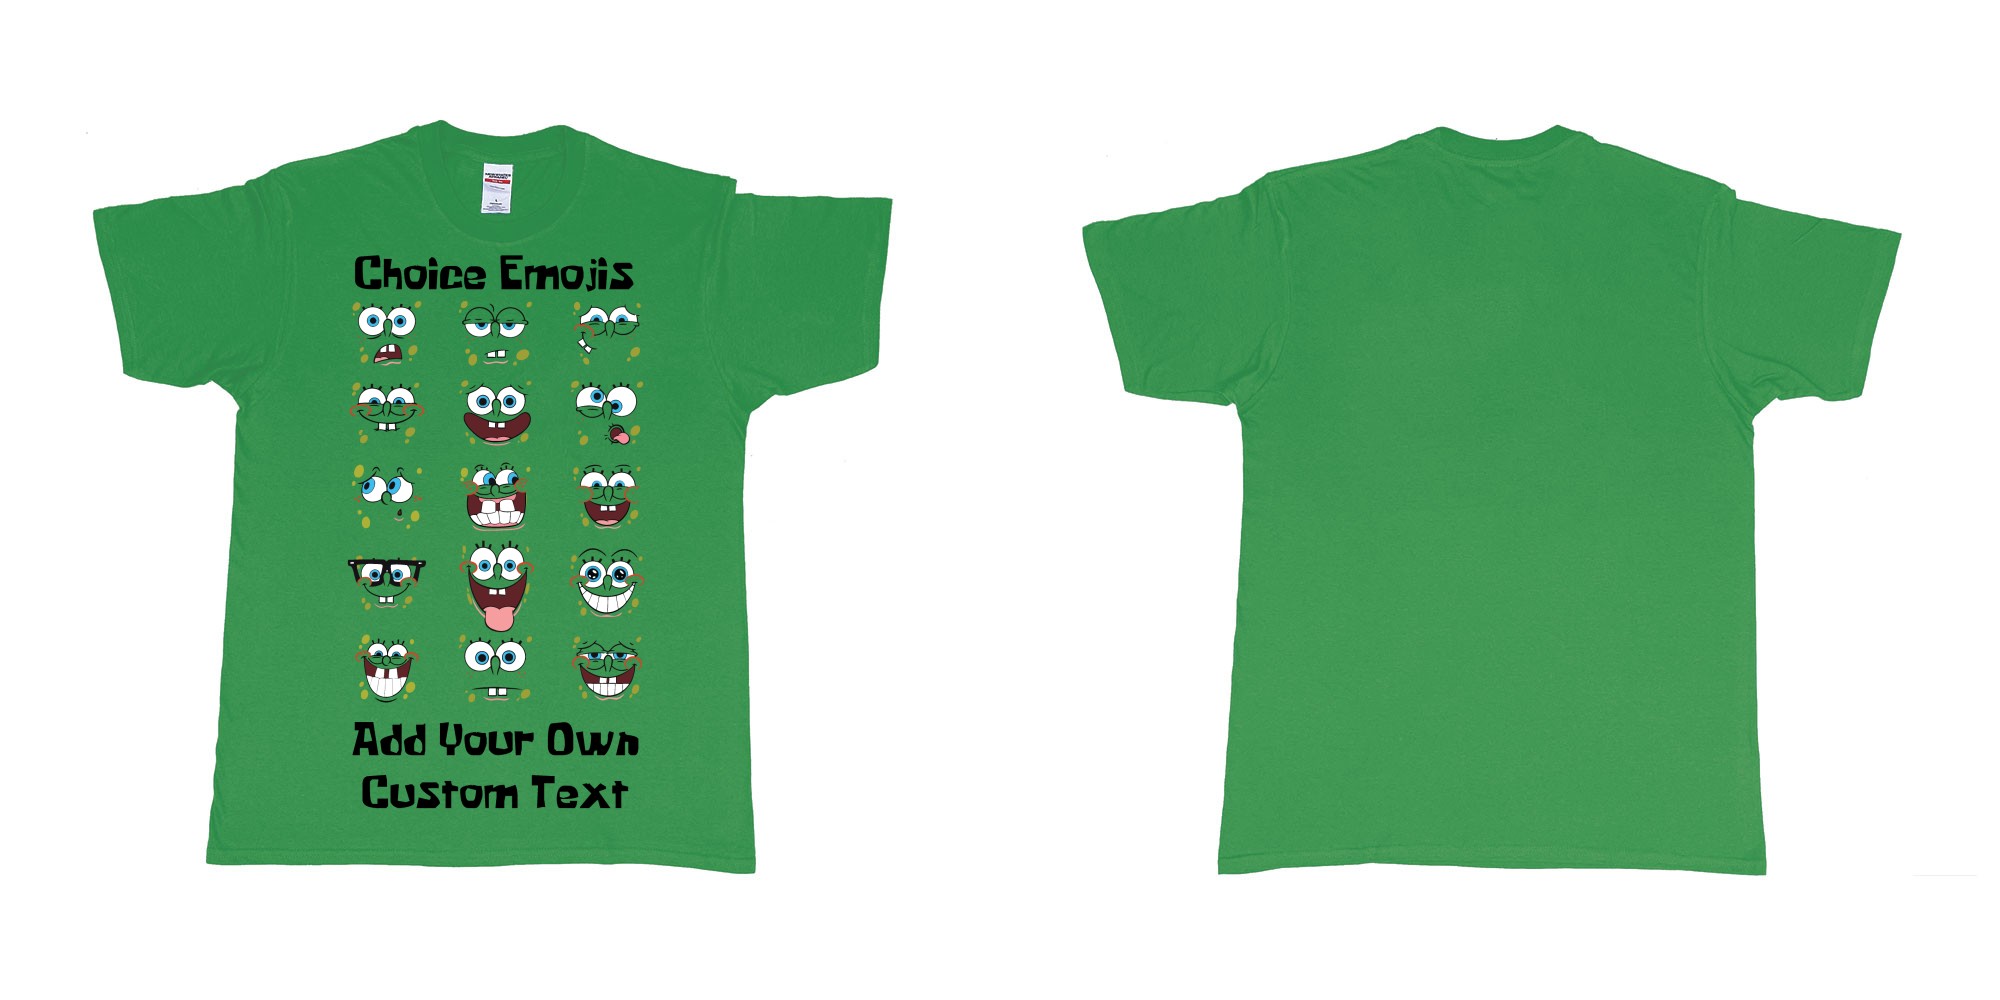 Custom tshirt design spongebob squarepants many faces emojis custum printing in fabric color irish-green choice your own text made in Bali by The Pirate Way